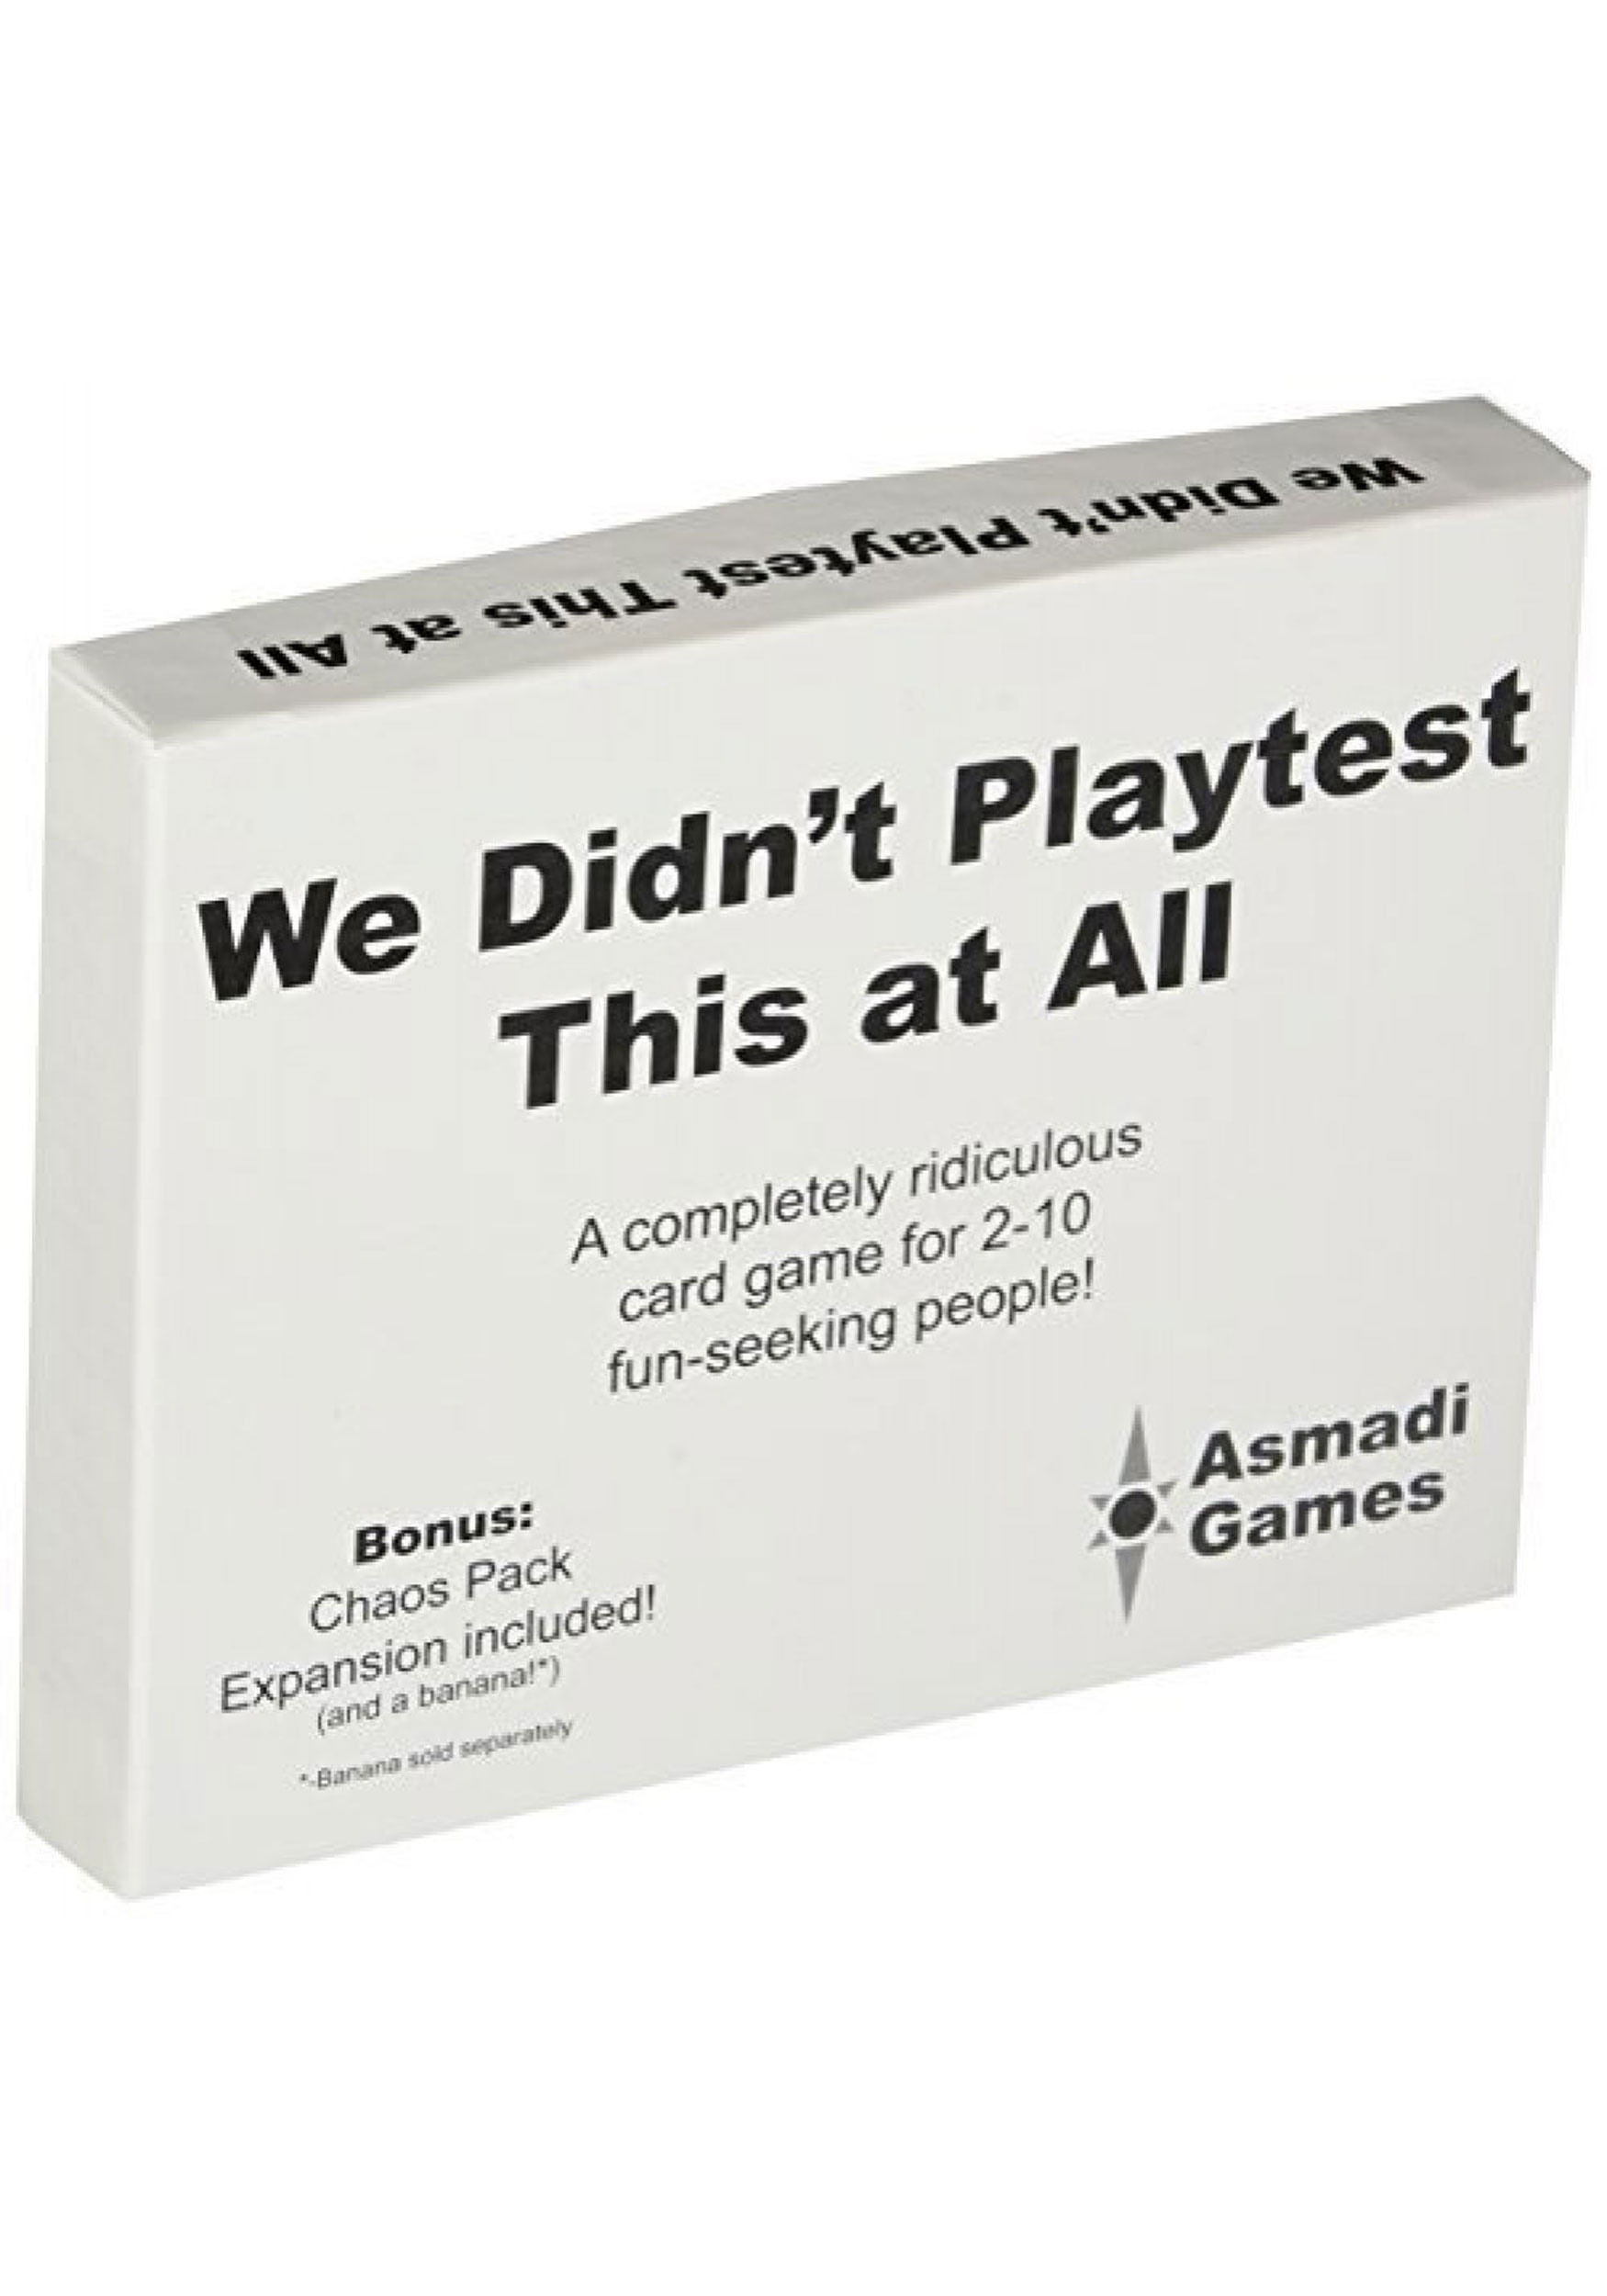 We Didn't Playtest This at All Card Game